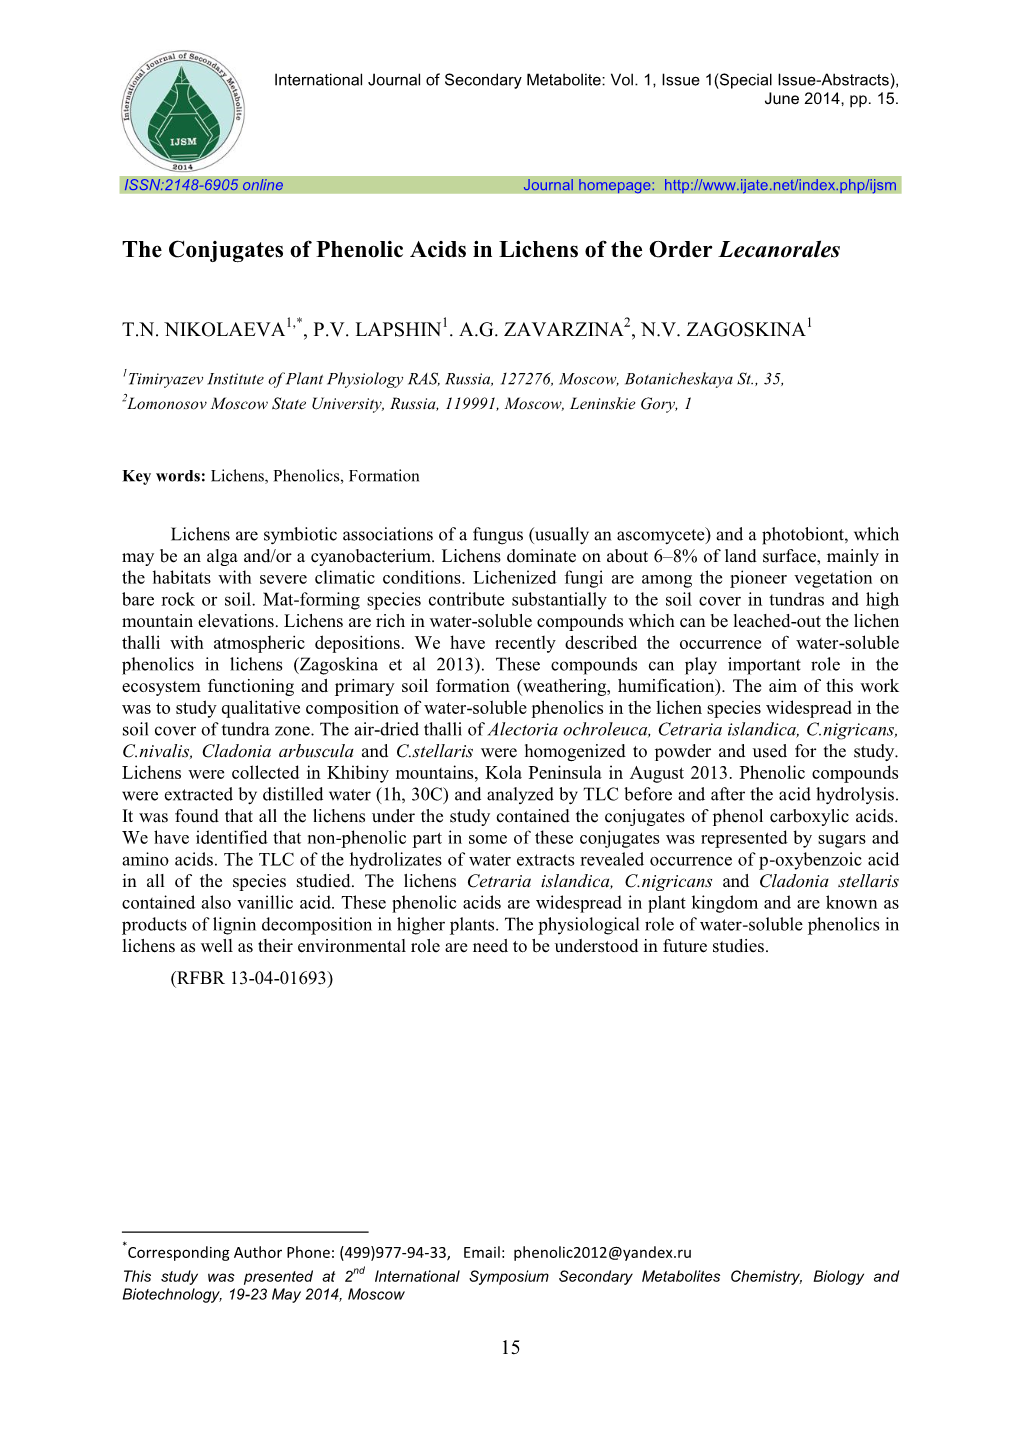 The Conjugates of Phenolic Acids in Lichens of the Order Lecanorales